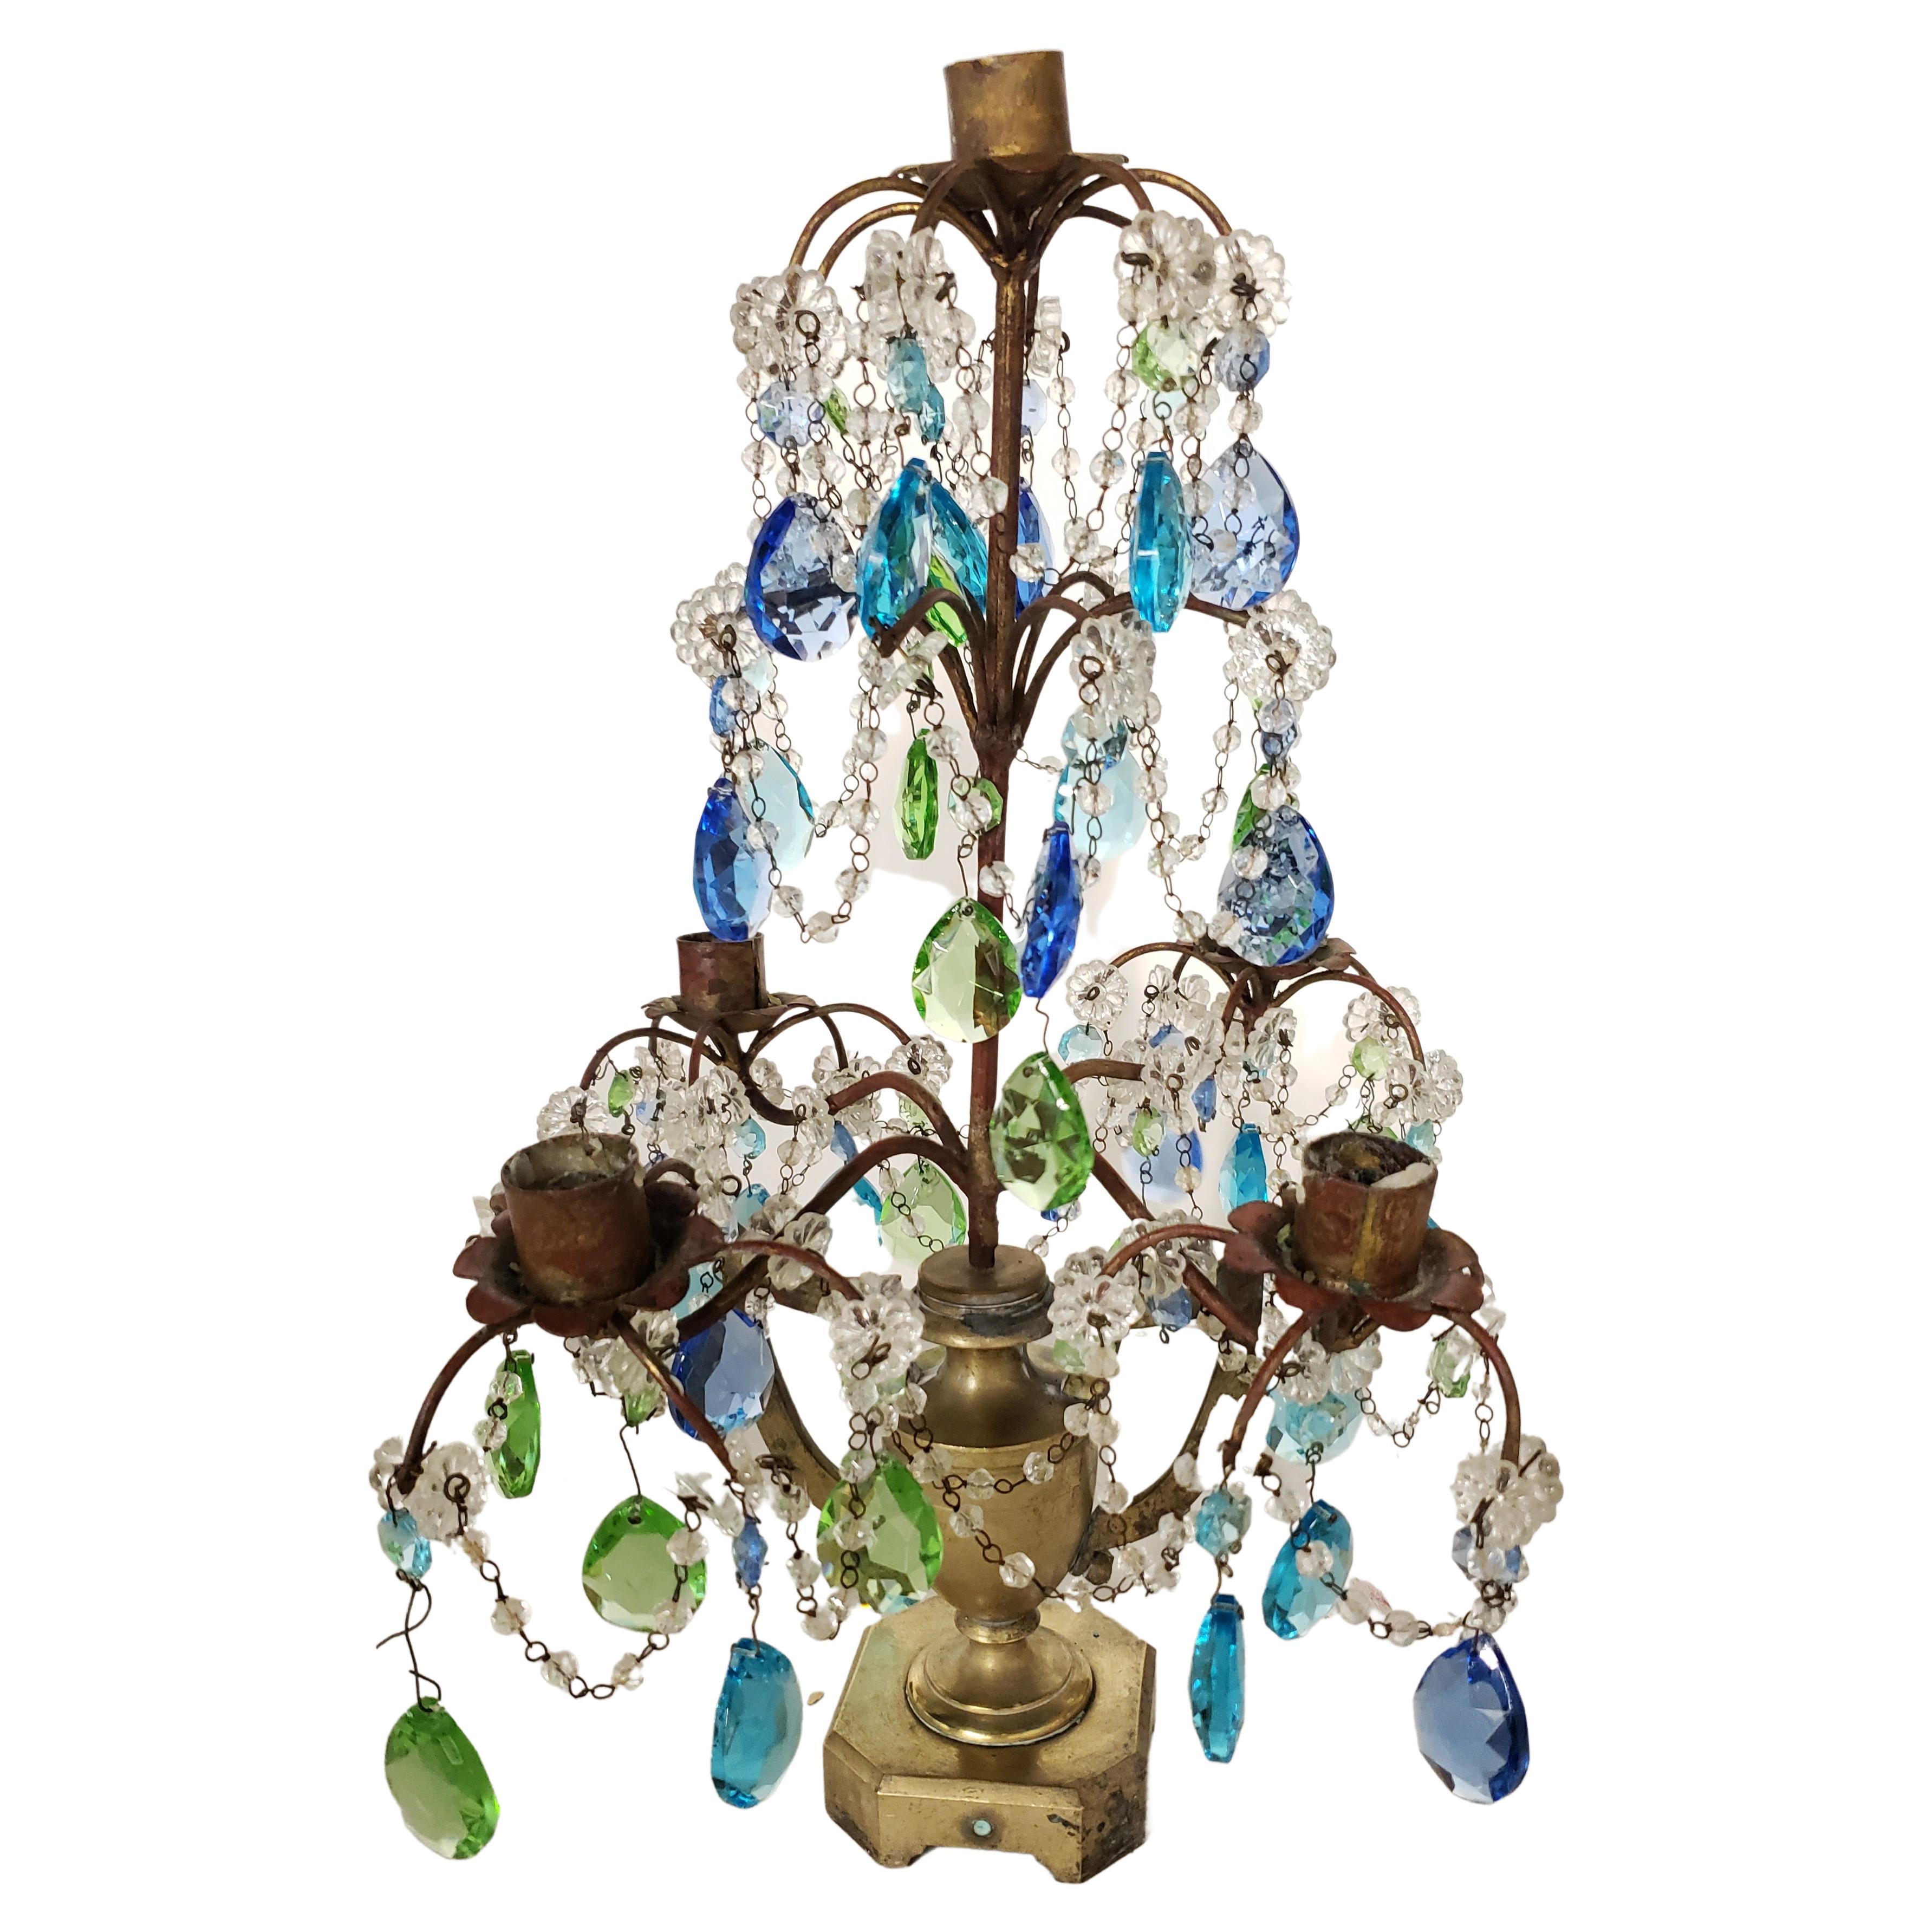 A exquisite 5-arm Solid Brass and various colors Crystal pendants Mounted Lustre Candelabra. 
May be used as a centerpiece, on top of sideboard or side table or lamp table. 
Measures 14 inches wide, 14 inches in depth and stands 17 inches tall.